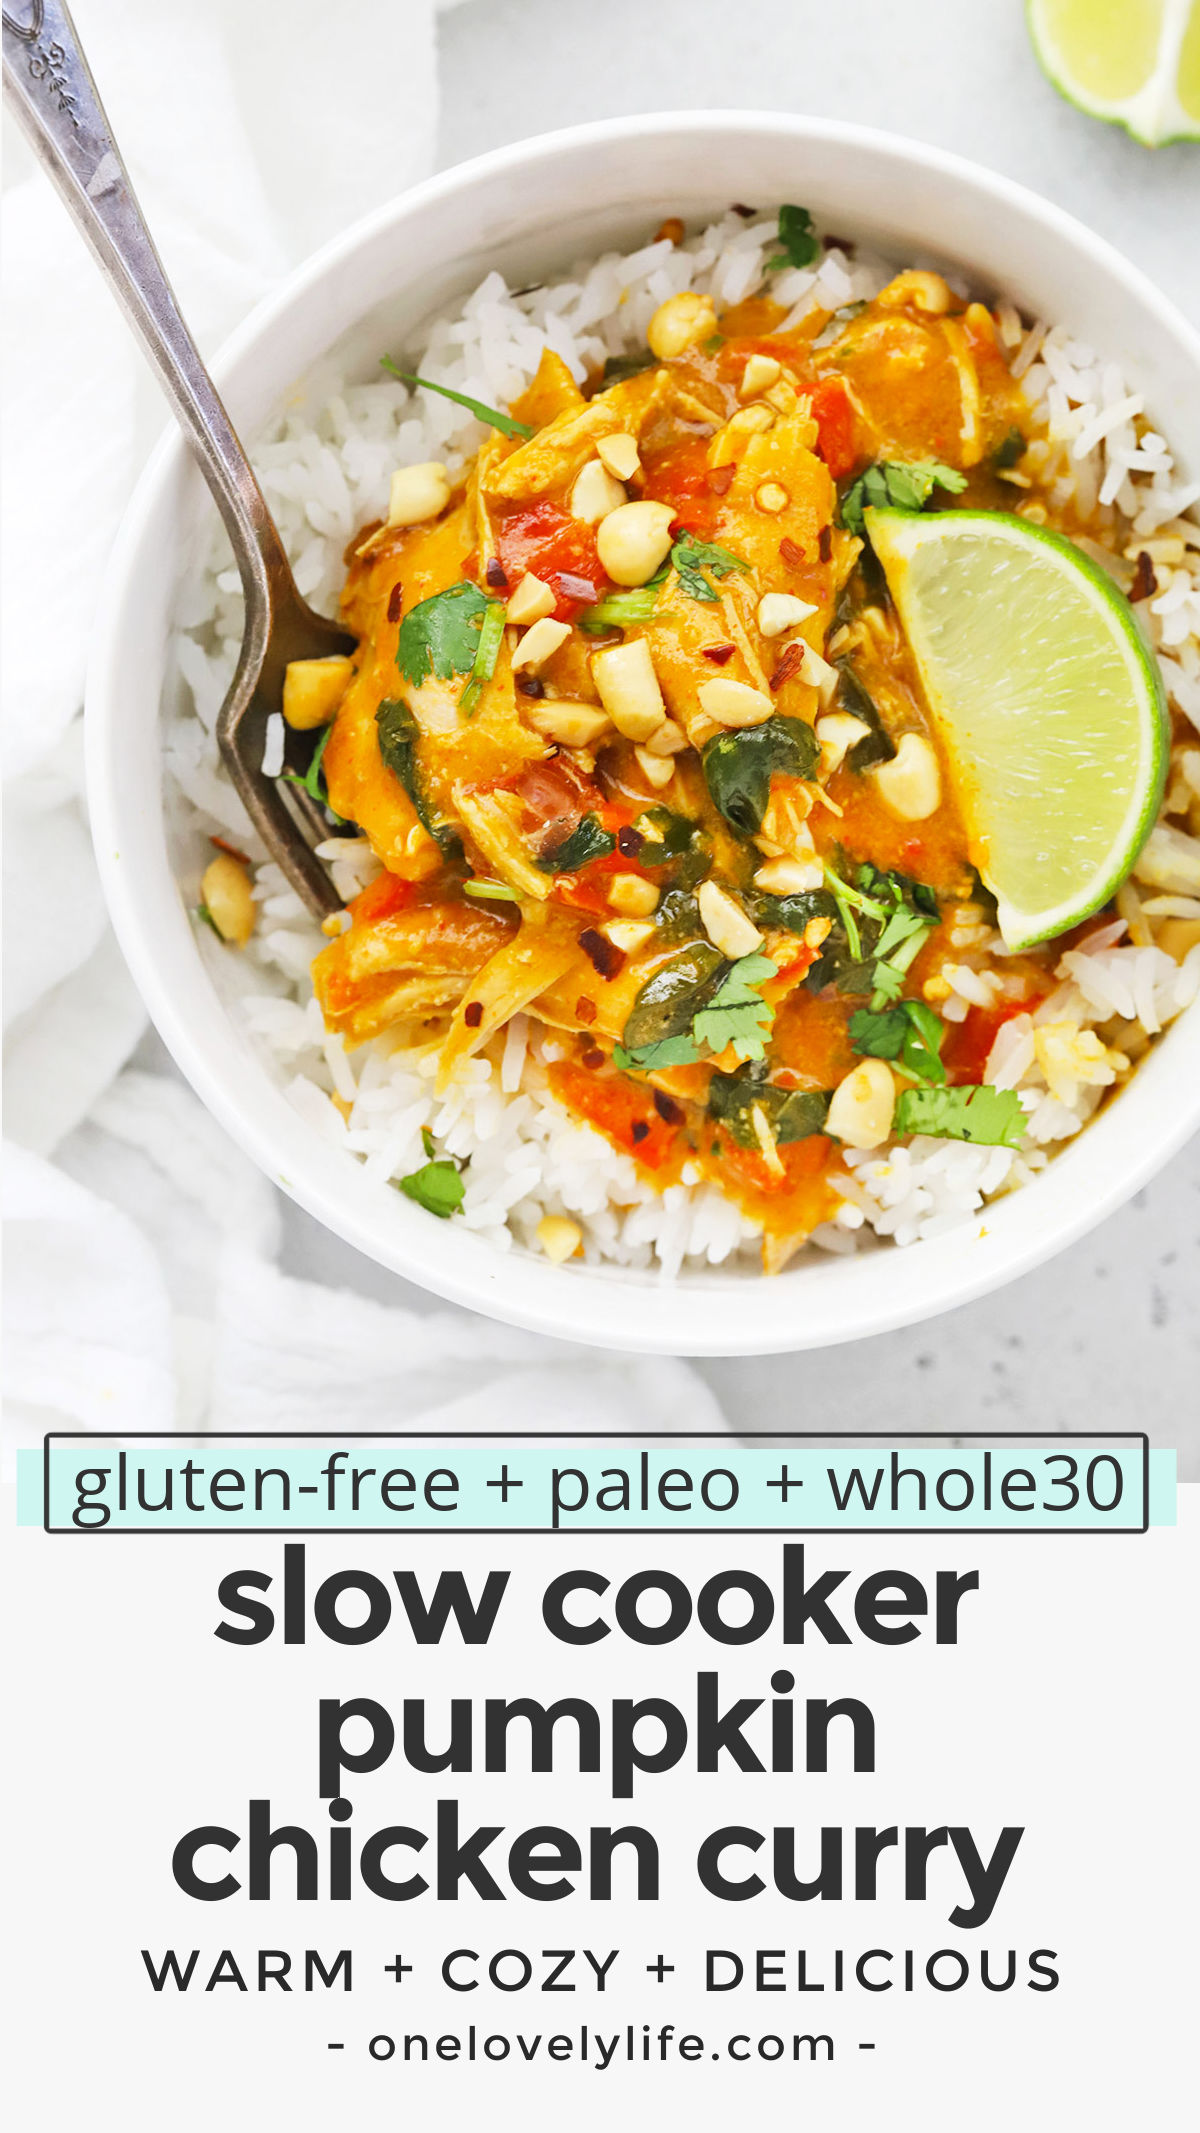 Slow Cooker Pumpkin Chicken Curry - This cozy pumpkin curry has tender chicken, colorful veggies & a mega-flavorful sauce to warm you up from the inside out. (Paleo, Whole30, Gluten-Free) // Pumpkin Curry Recipe // Slow cooker curry // savory pumpkin recipes // healthy dinner // paleo slow cooker recipe // whole30 slow cooker recipe // paleo chicken // healthy pumpkin recipe #glutenfree #pumpkin #slowcooker #crockpot #paleo #whole30